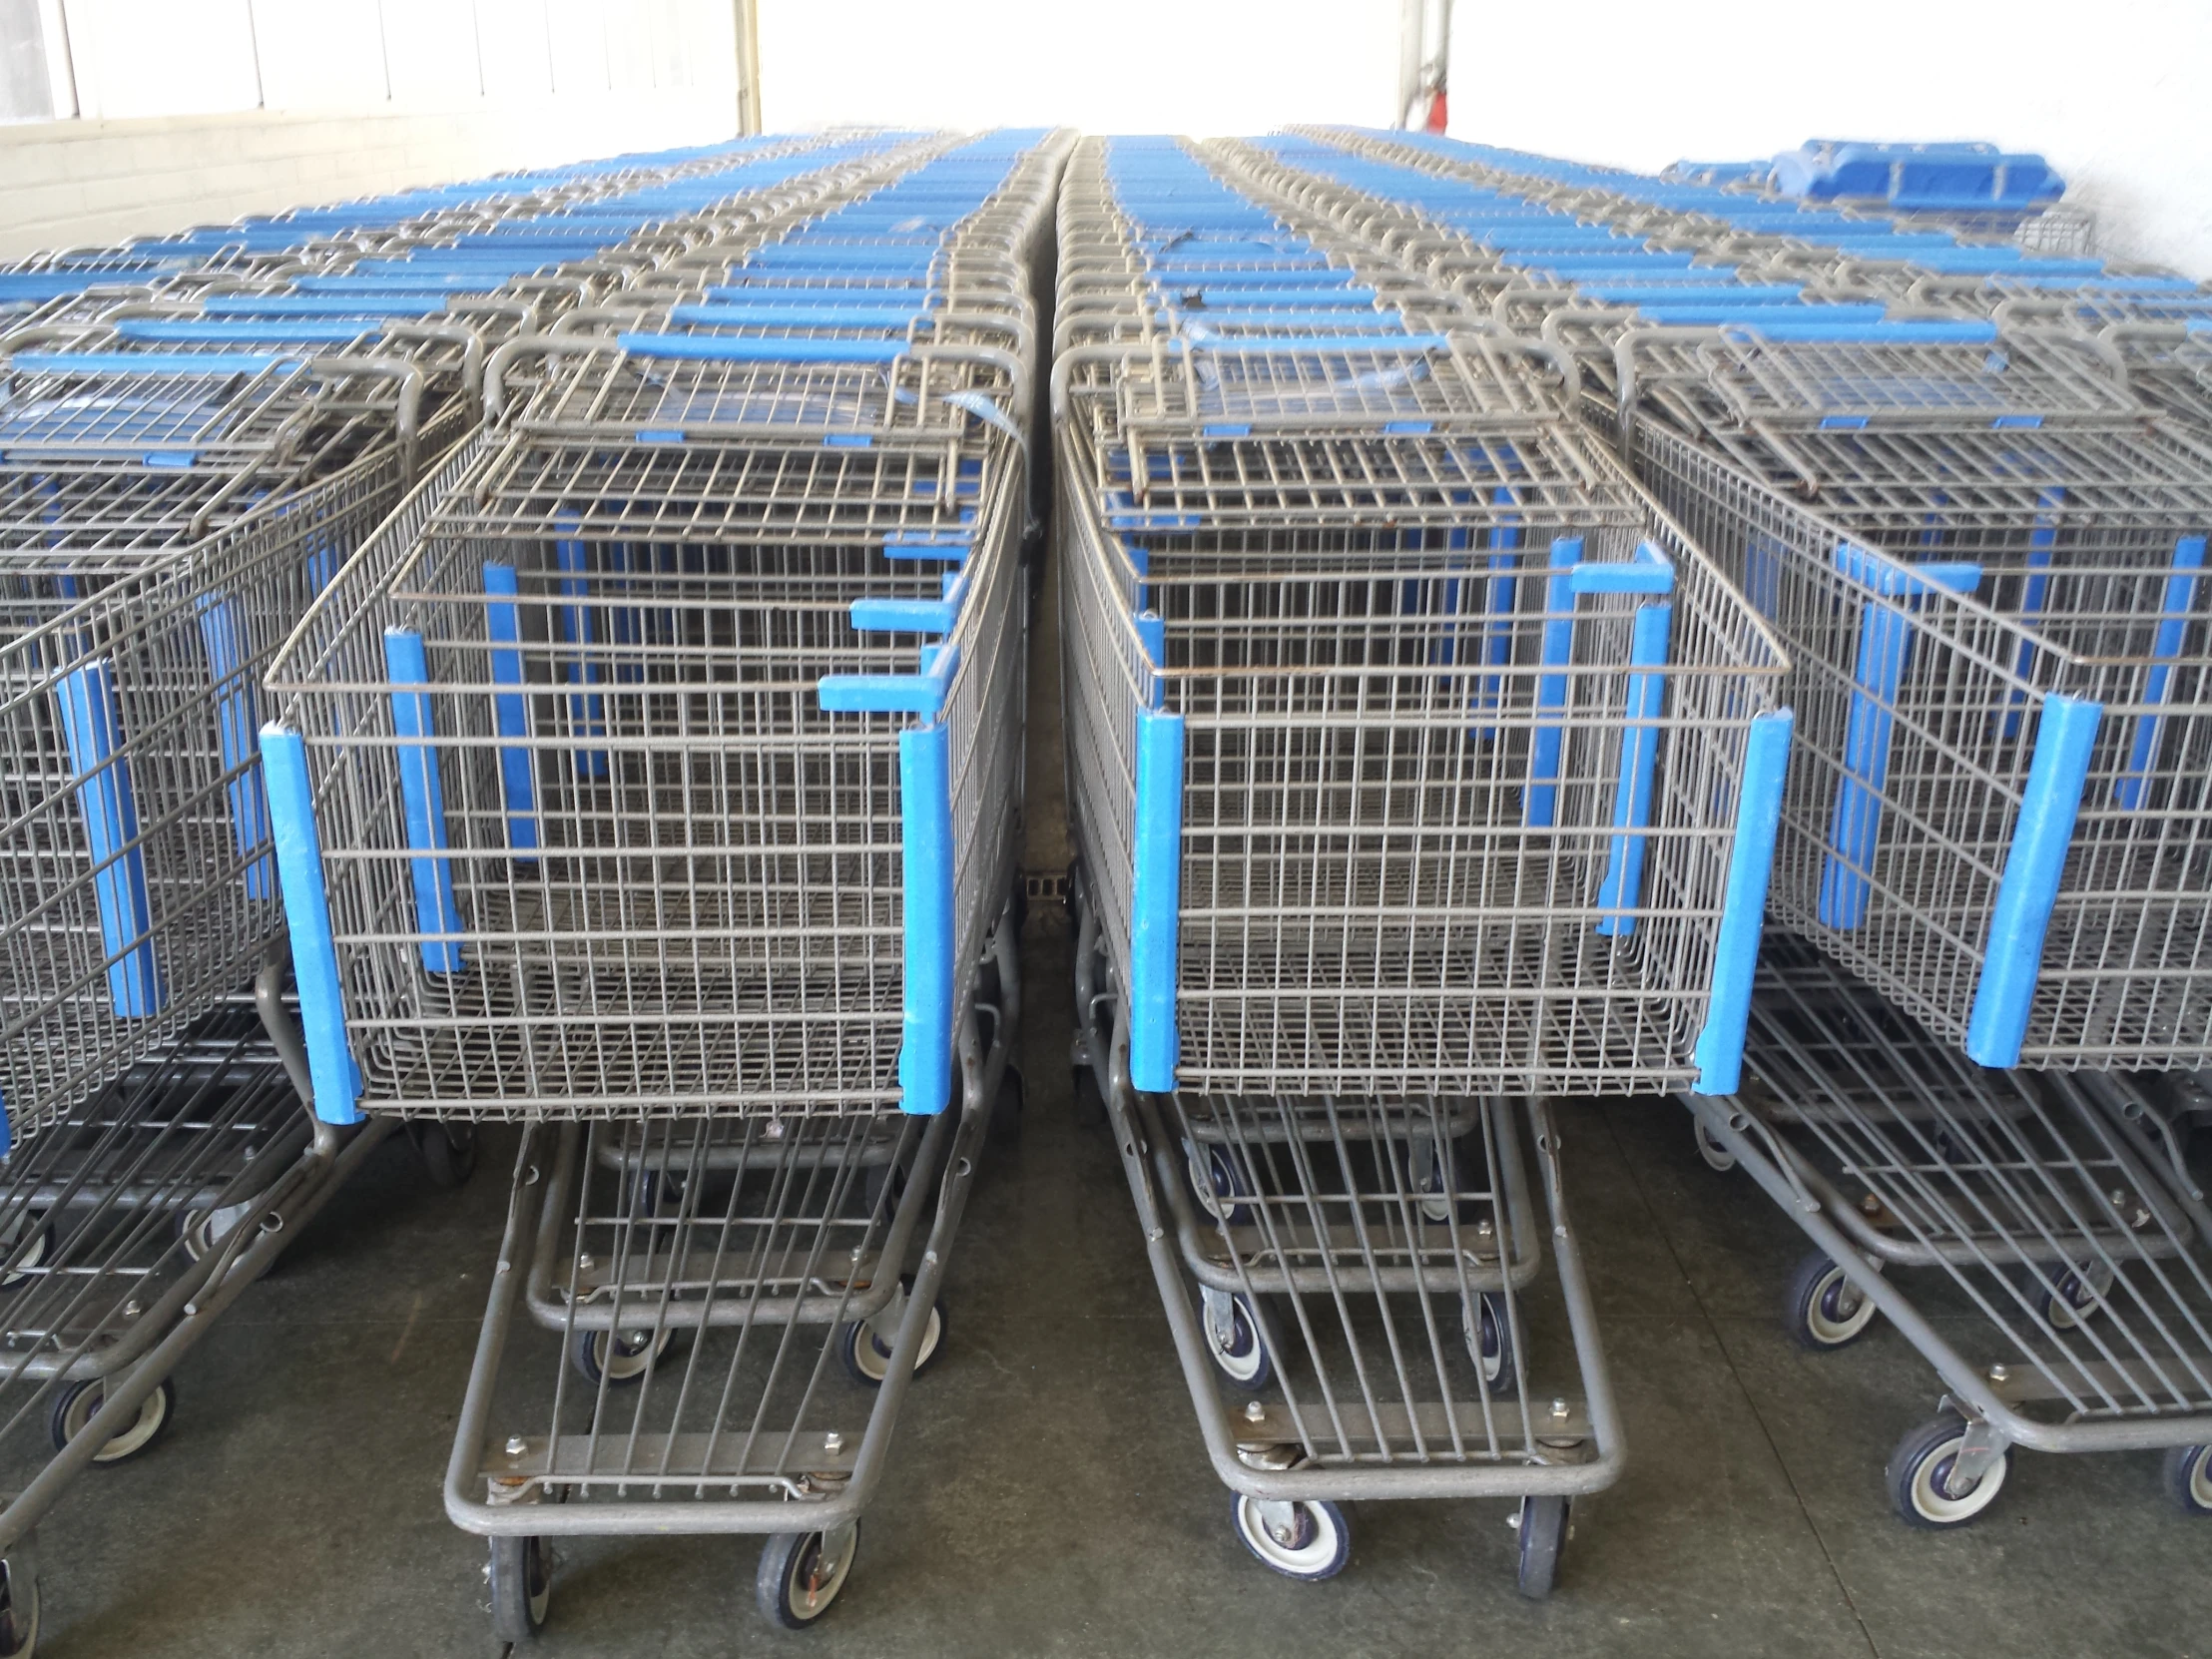 shopping carts sit stacked together on the floor